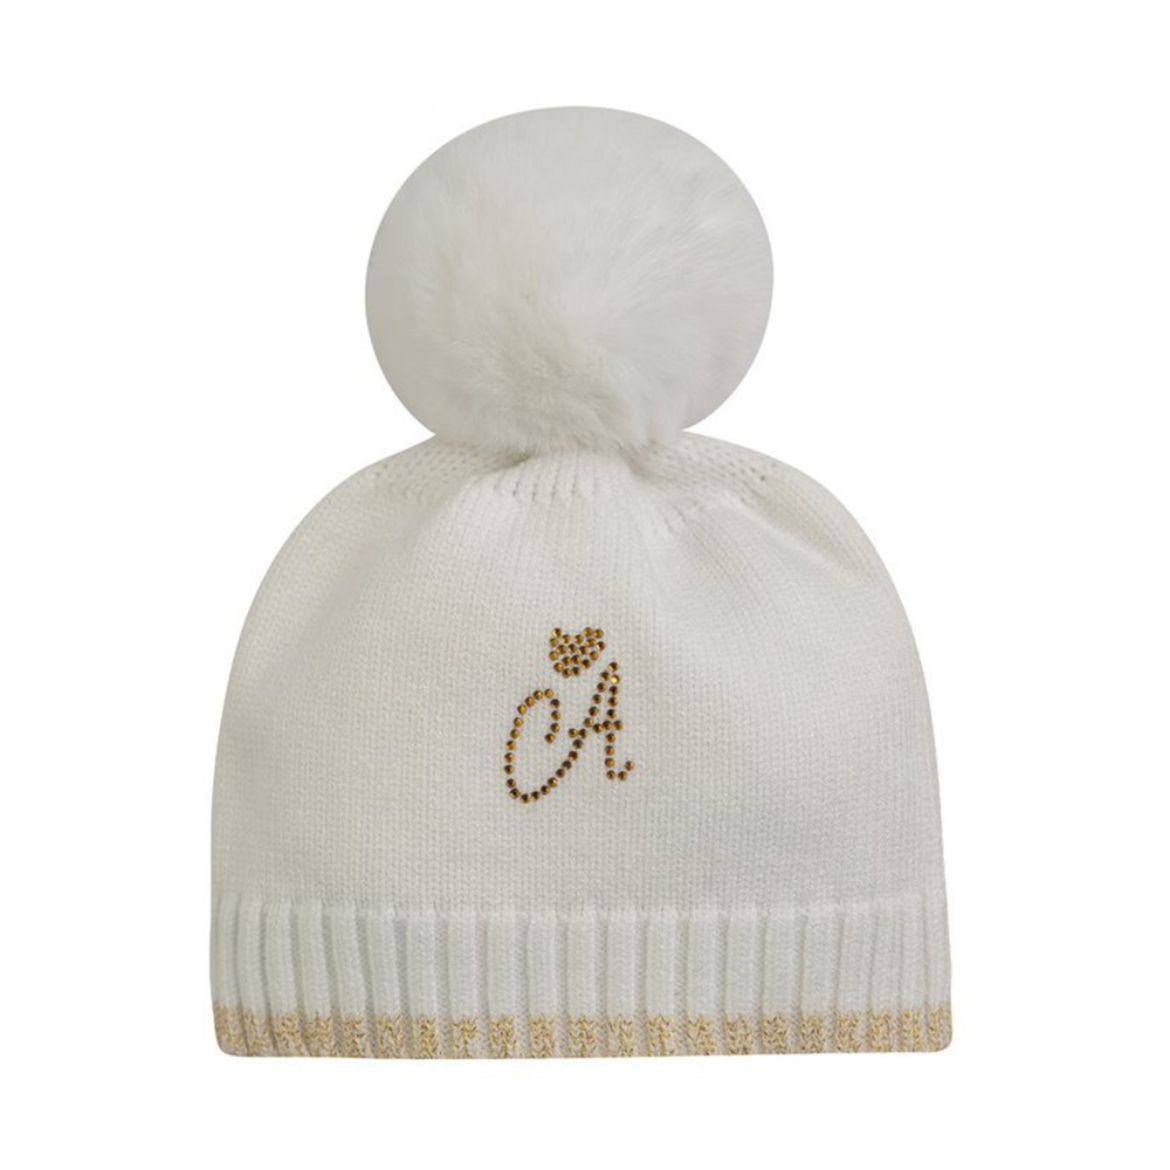 Picture of Little A Girls 'Emberly' White Pom Pom Hat